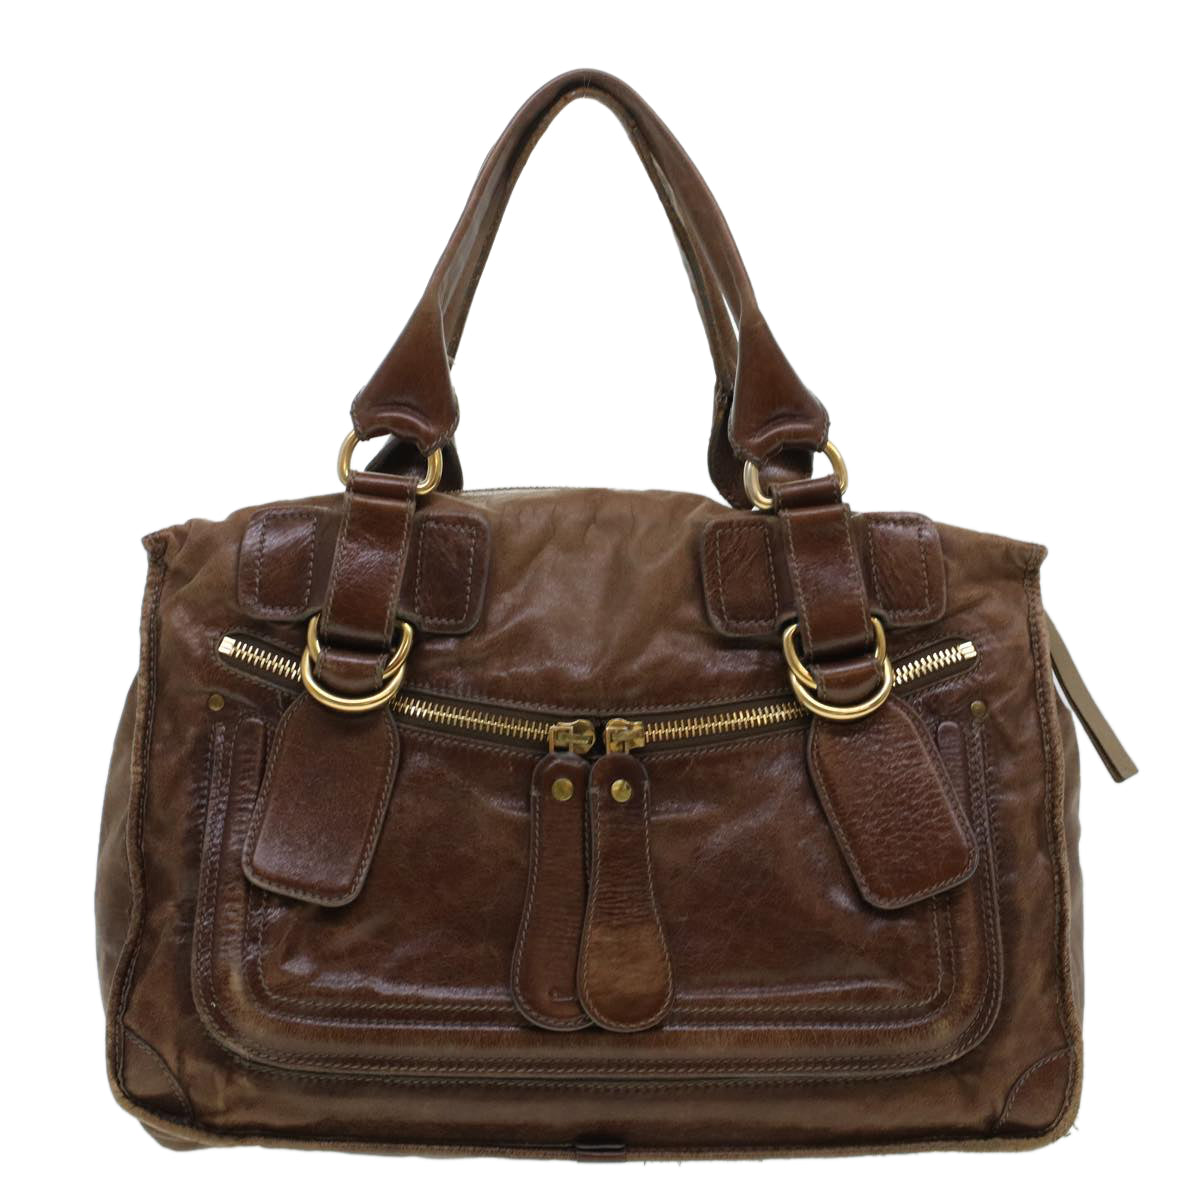 Chloe Tote Bag Leather Brown Auth bs5947 - 0